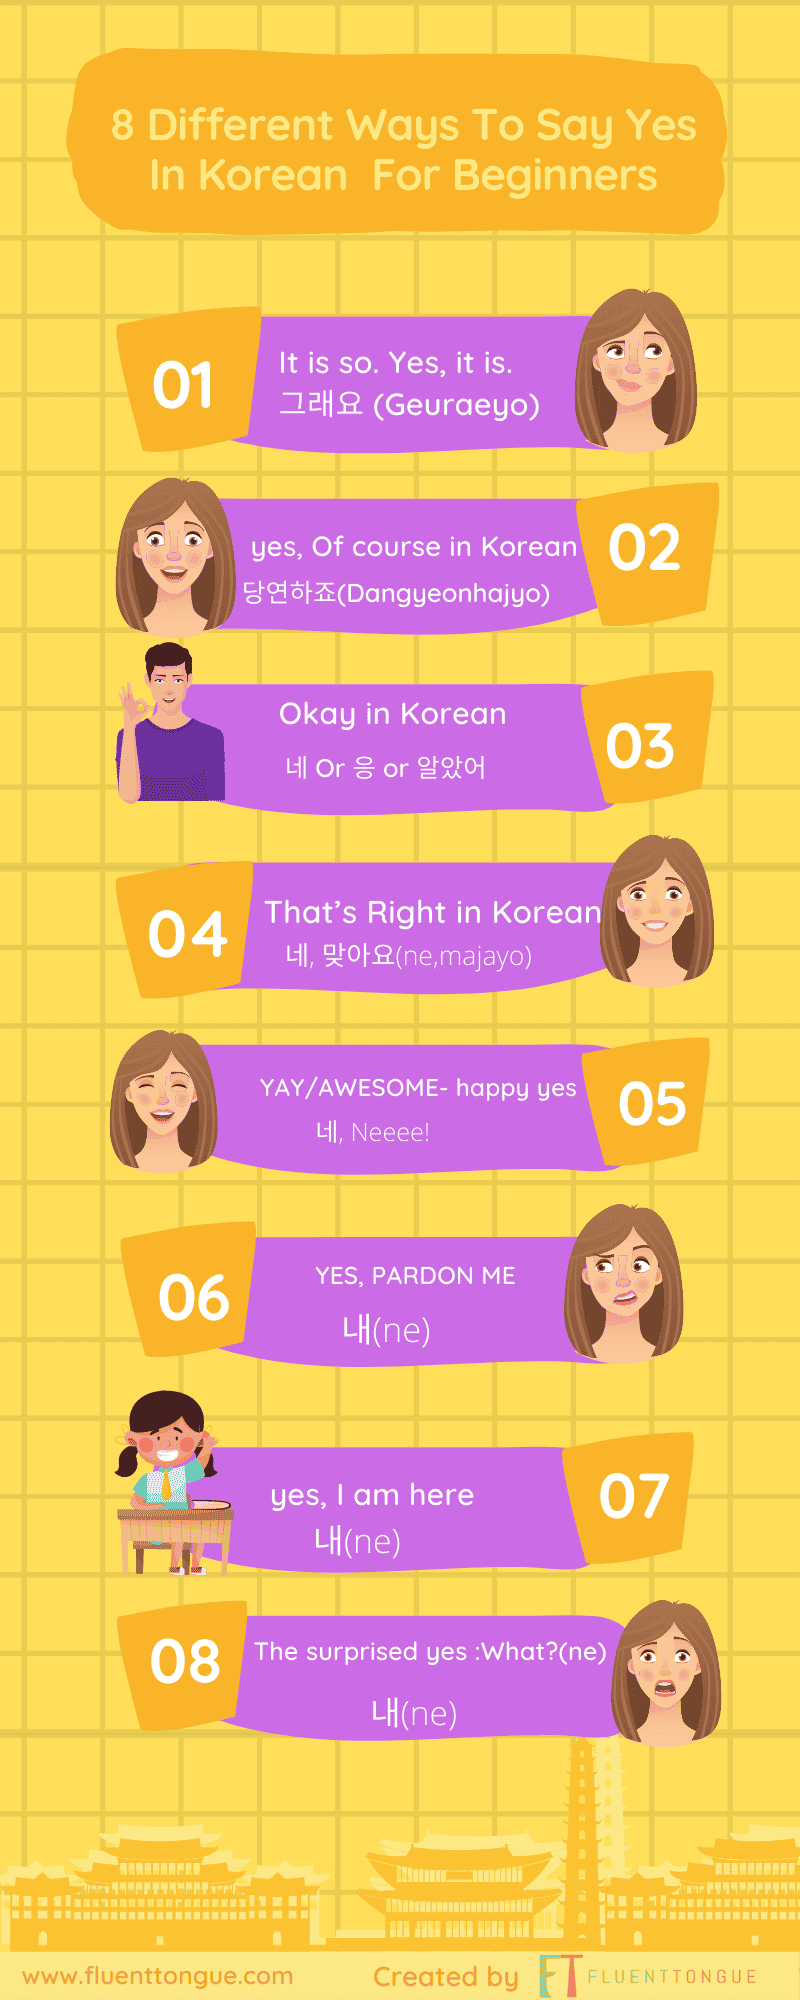 8  Different Ways To Say Yes In Korean Language For Beginners.